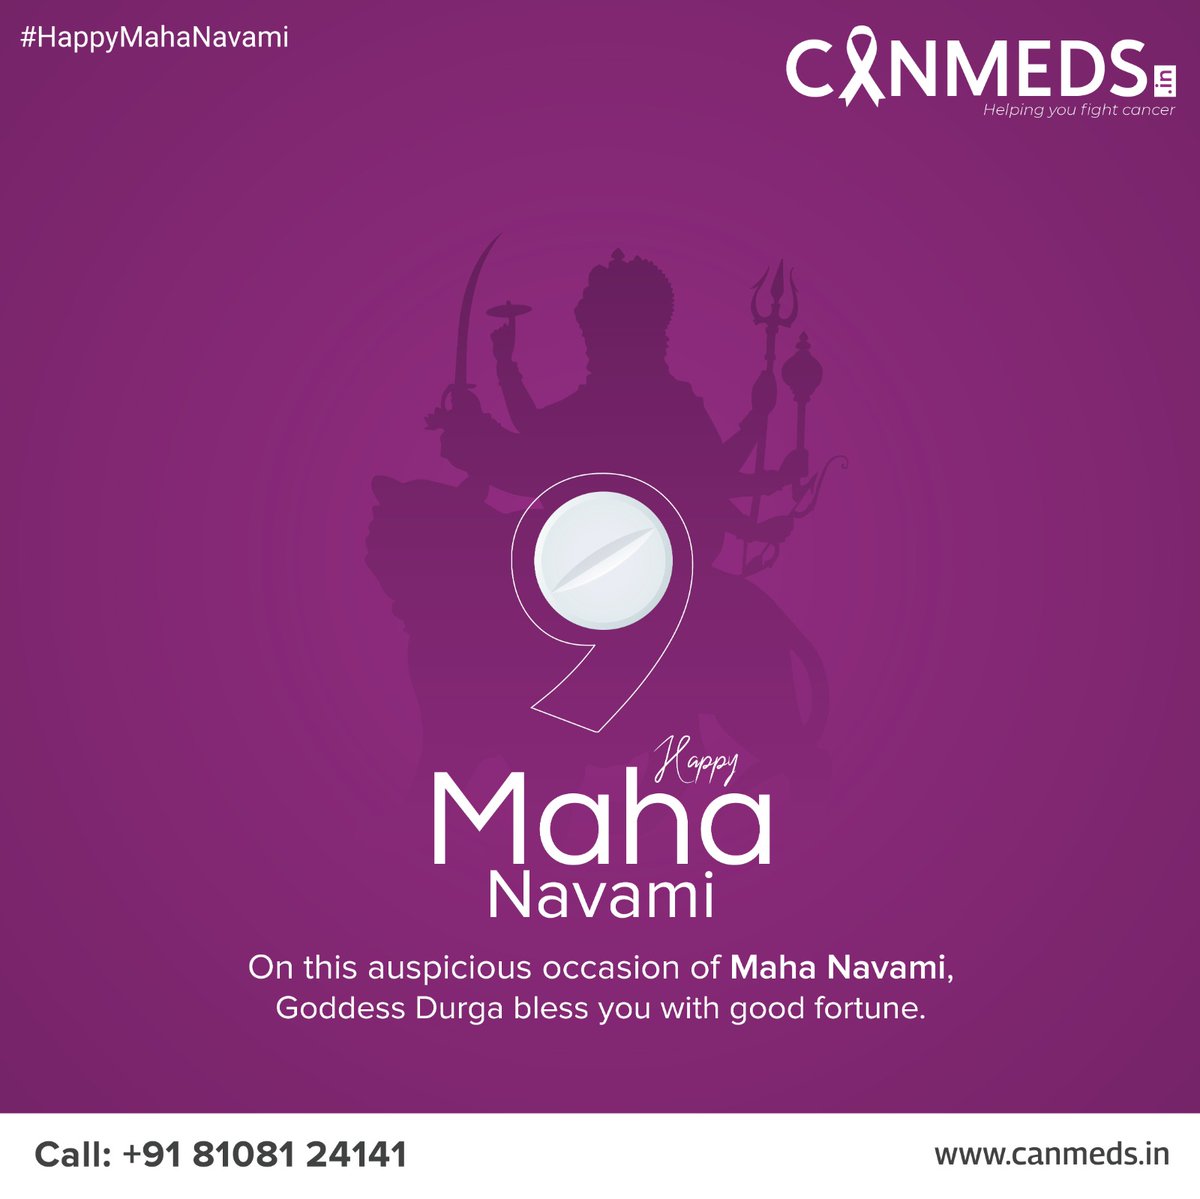 As we celebrate Maha Navmi, let's offer our prayers to Goddess Durga for strength, well-being, and a life filled with positivity and love. Happy Maha Navmi!

#Canmeds #HappyNavratri #MahaNavami #DivineBlessings